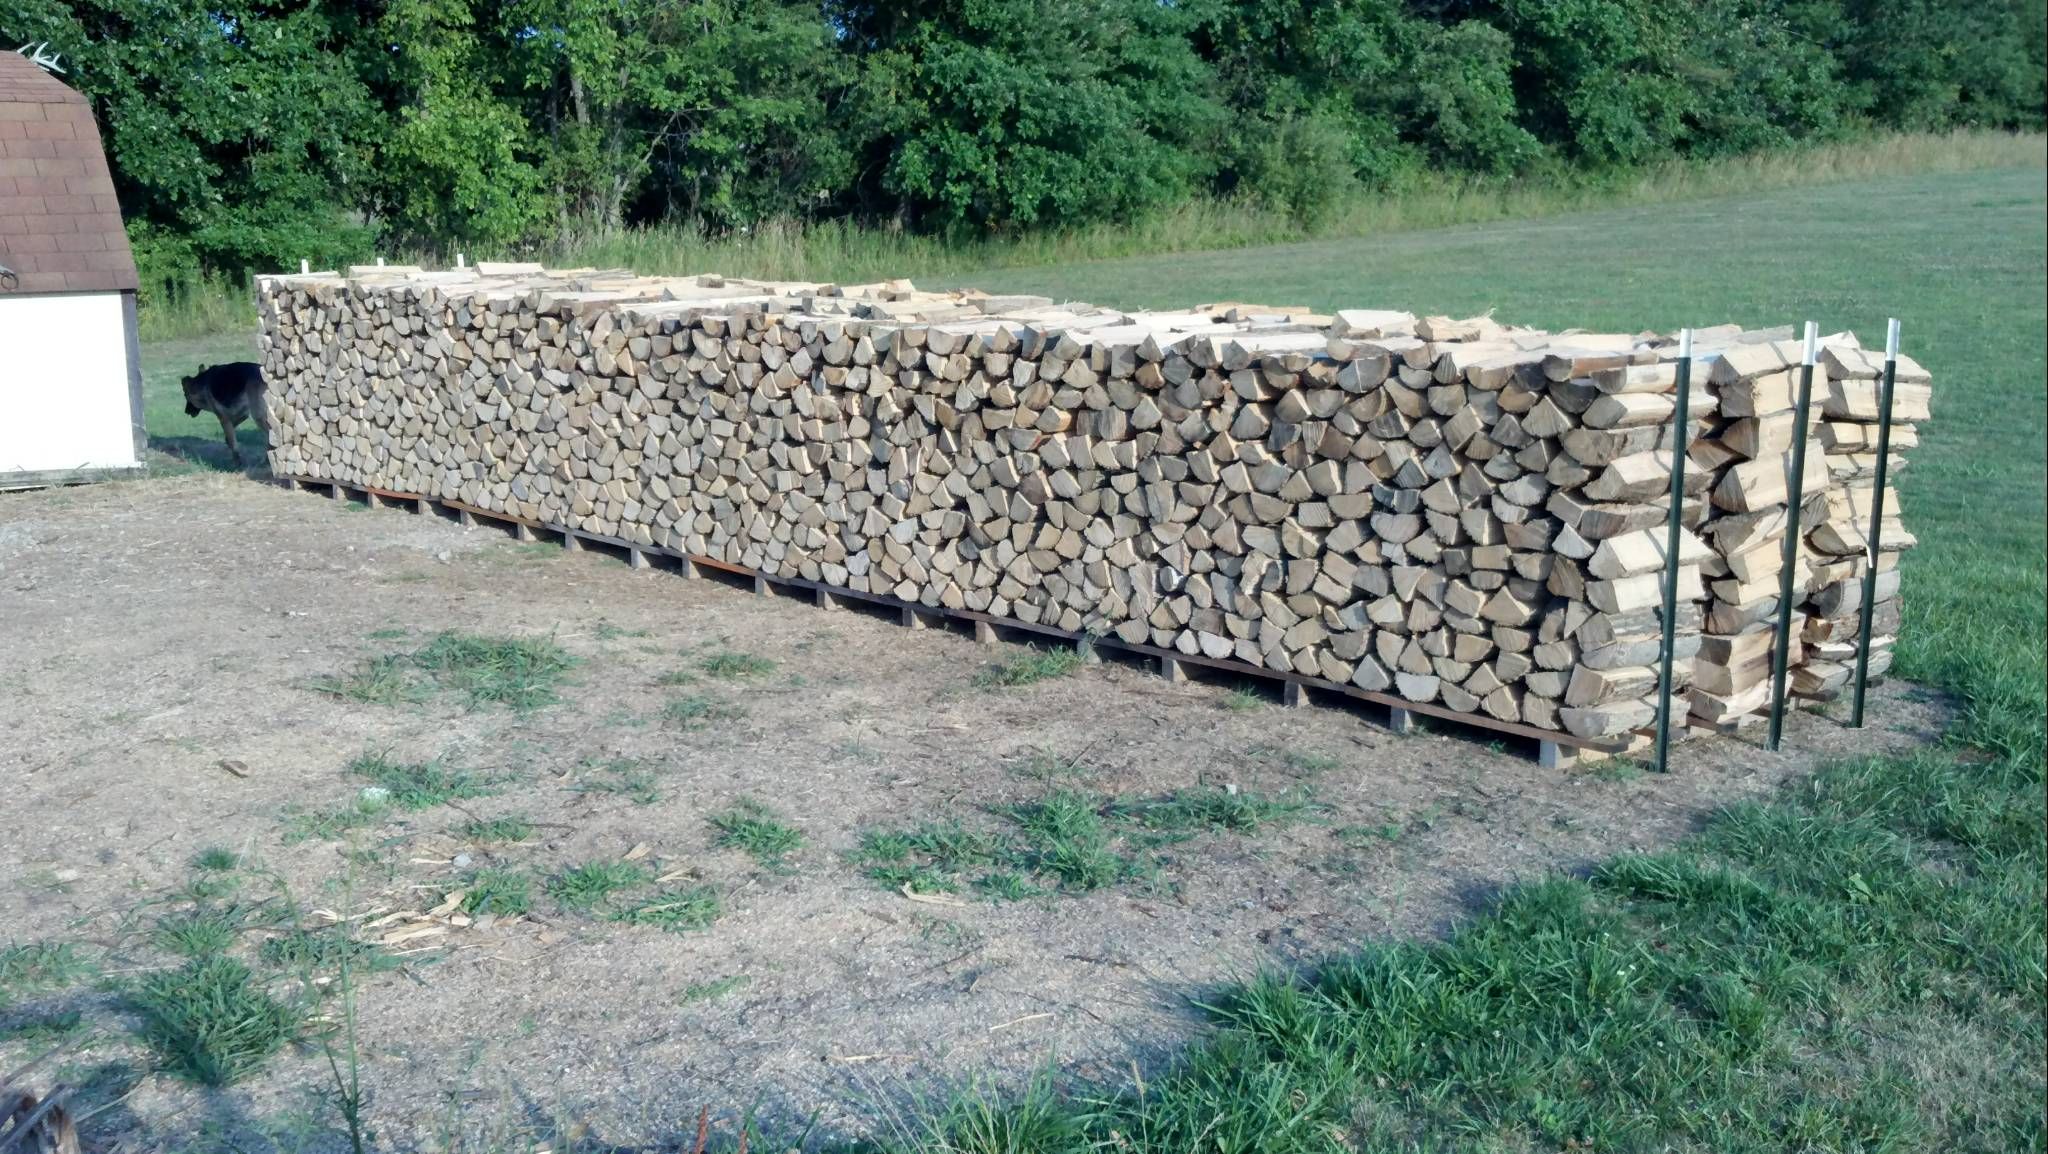 plans or tips for outdoor firewood rack | Hearth.com Forums Home